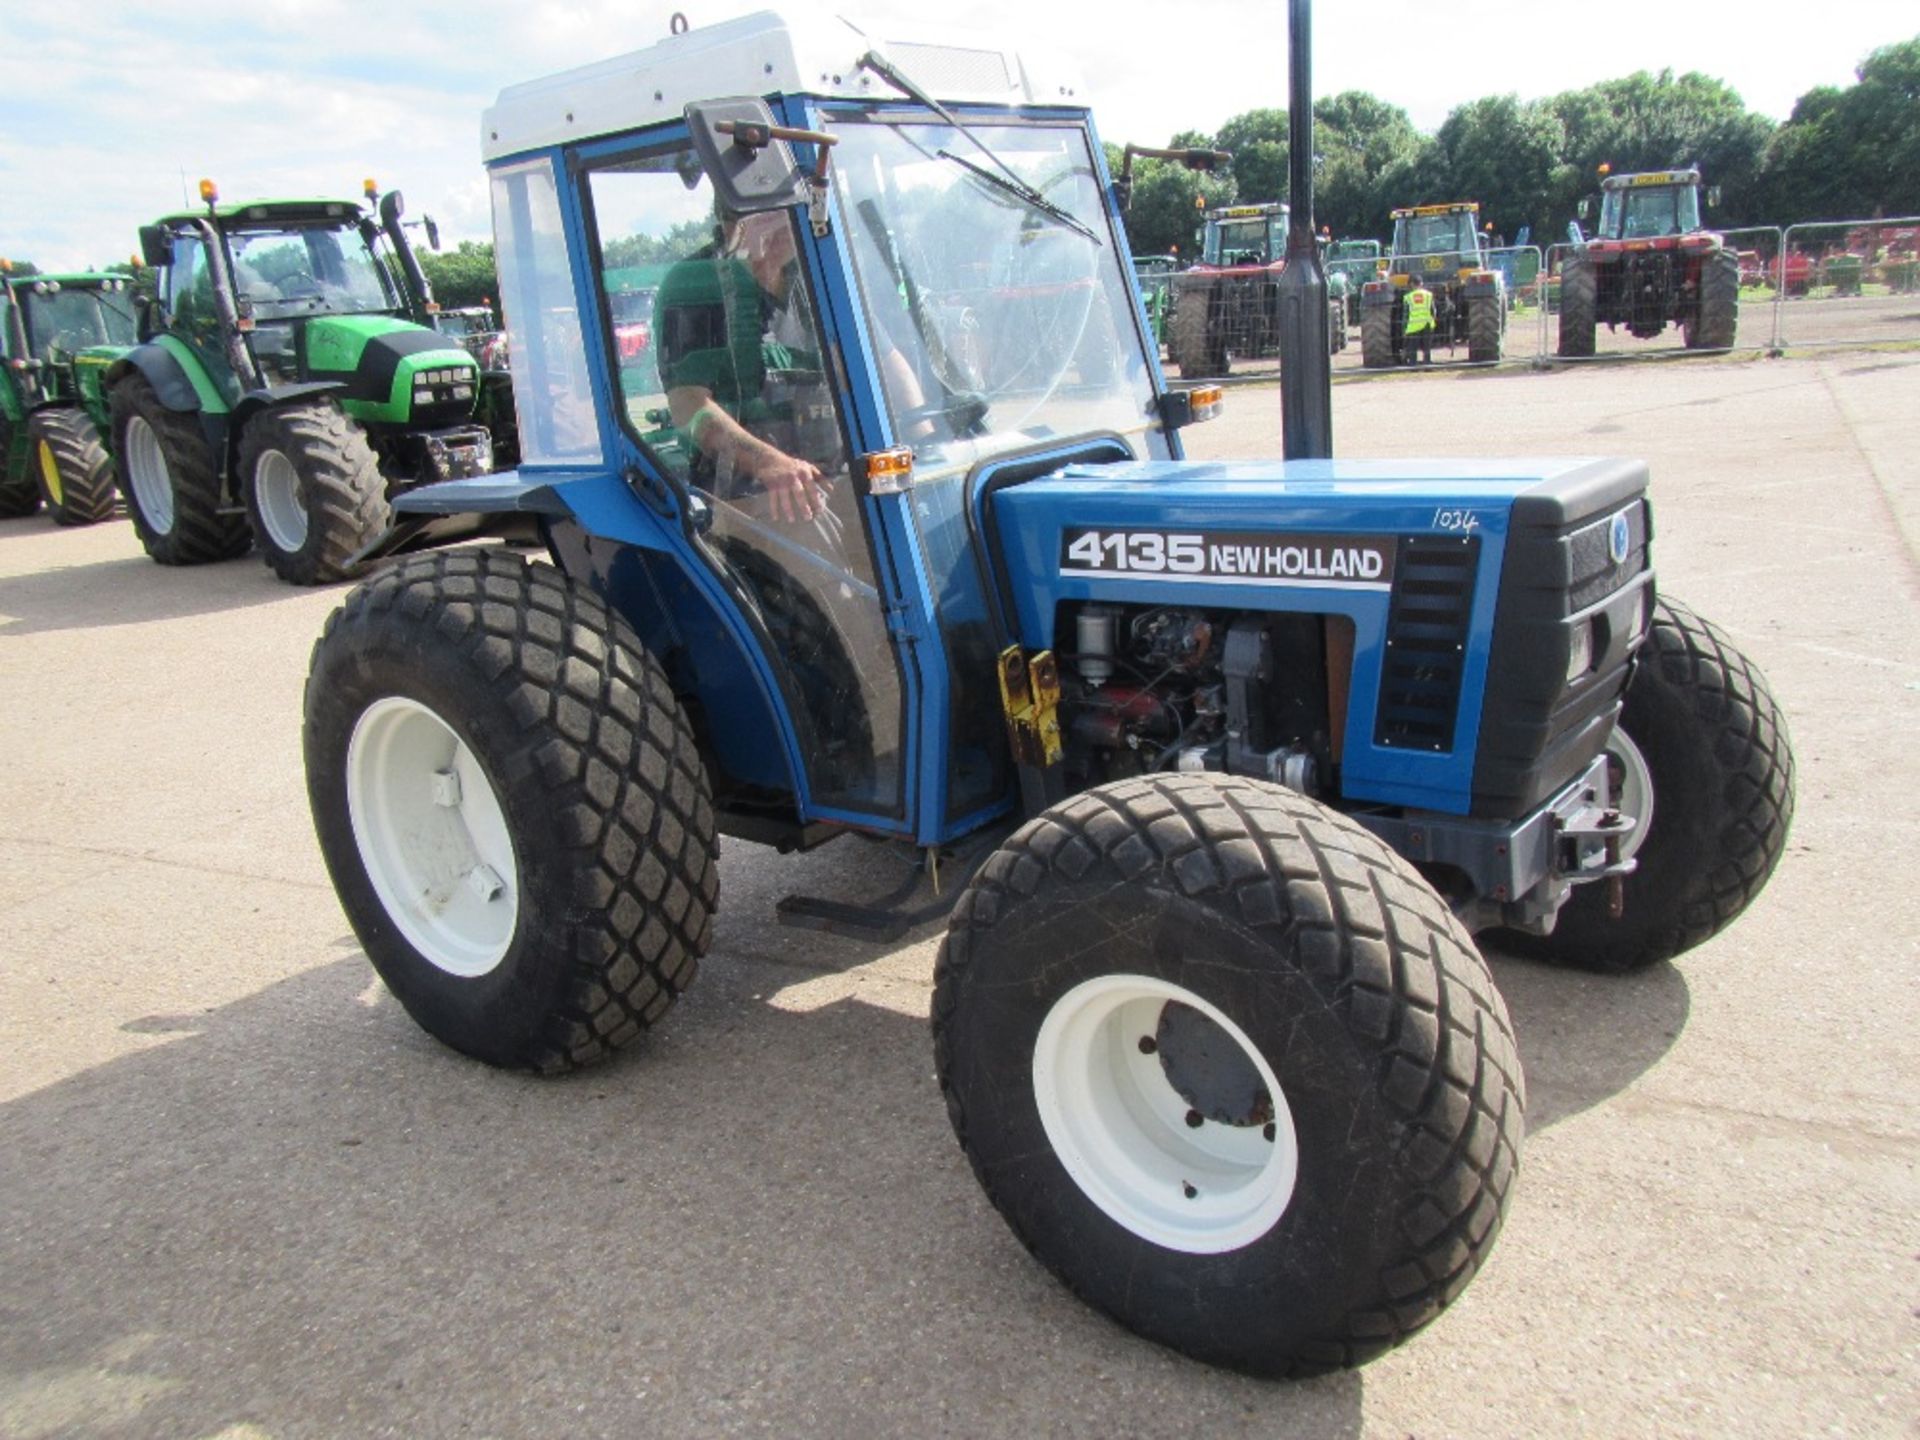 New Holland 4135 4wd Tractor with Grass Tyres Reg. No. P551 PHJ - Image 3 of 12